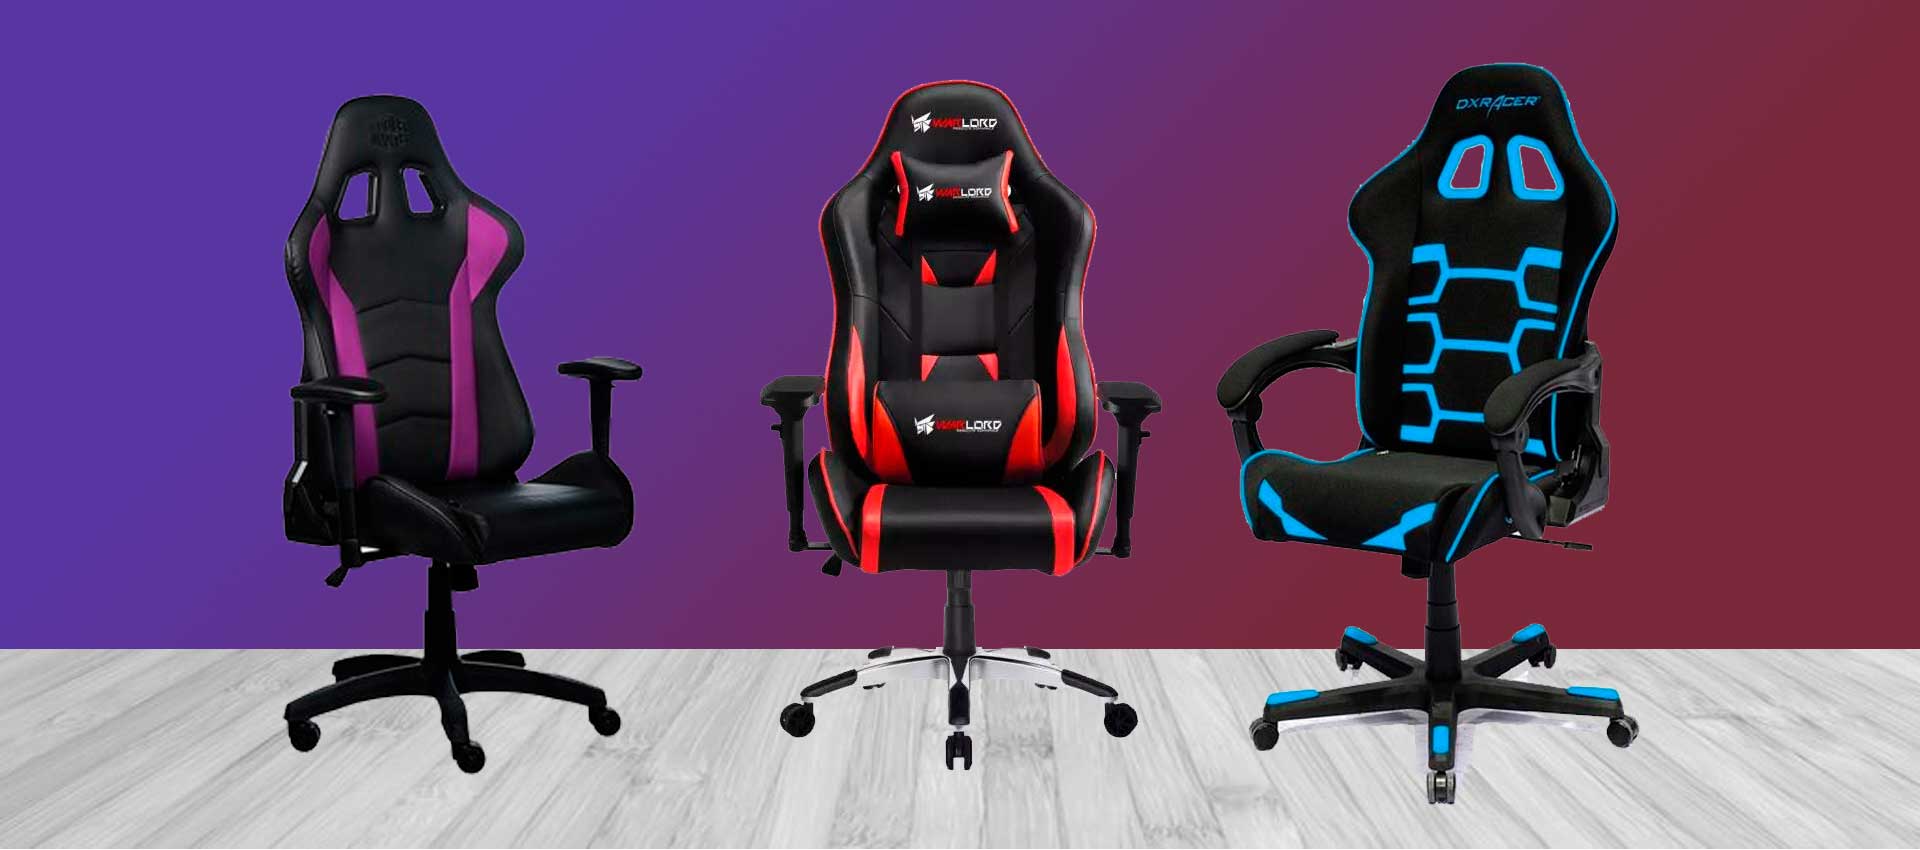 Get Best Gaming Furniture For Your Room In Pakistan